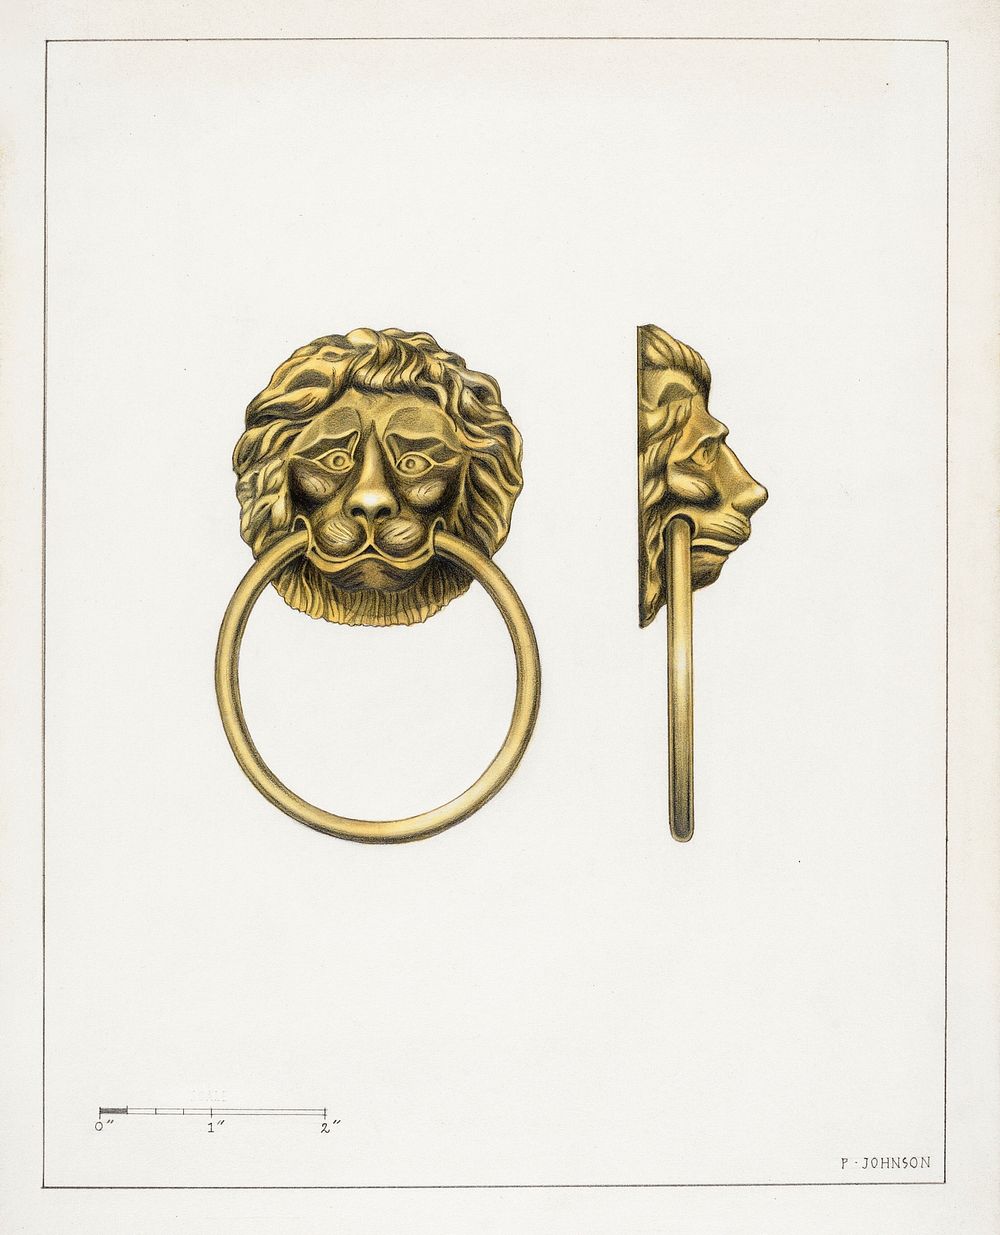 Drawer Pull (1936) by Philip Johnson. Original from The National Gallery of Art. Digitally enhanced by rawpixel.